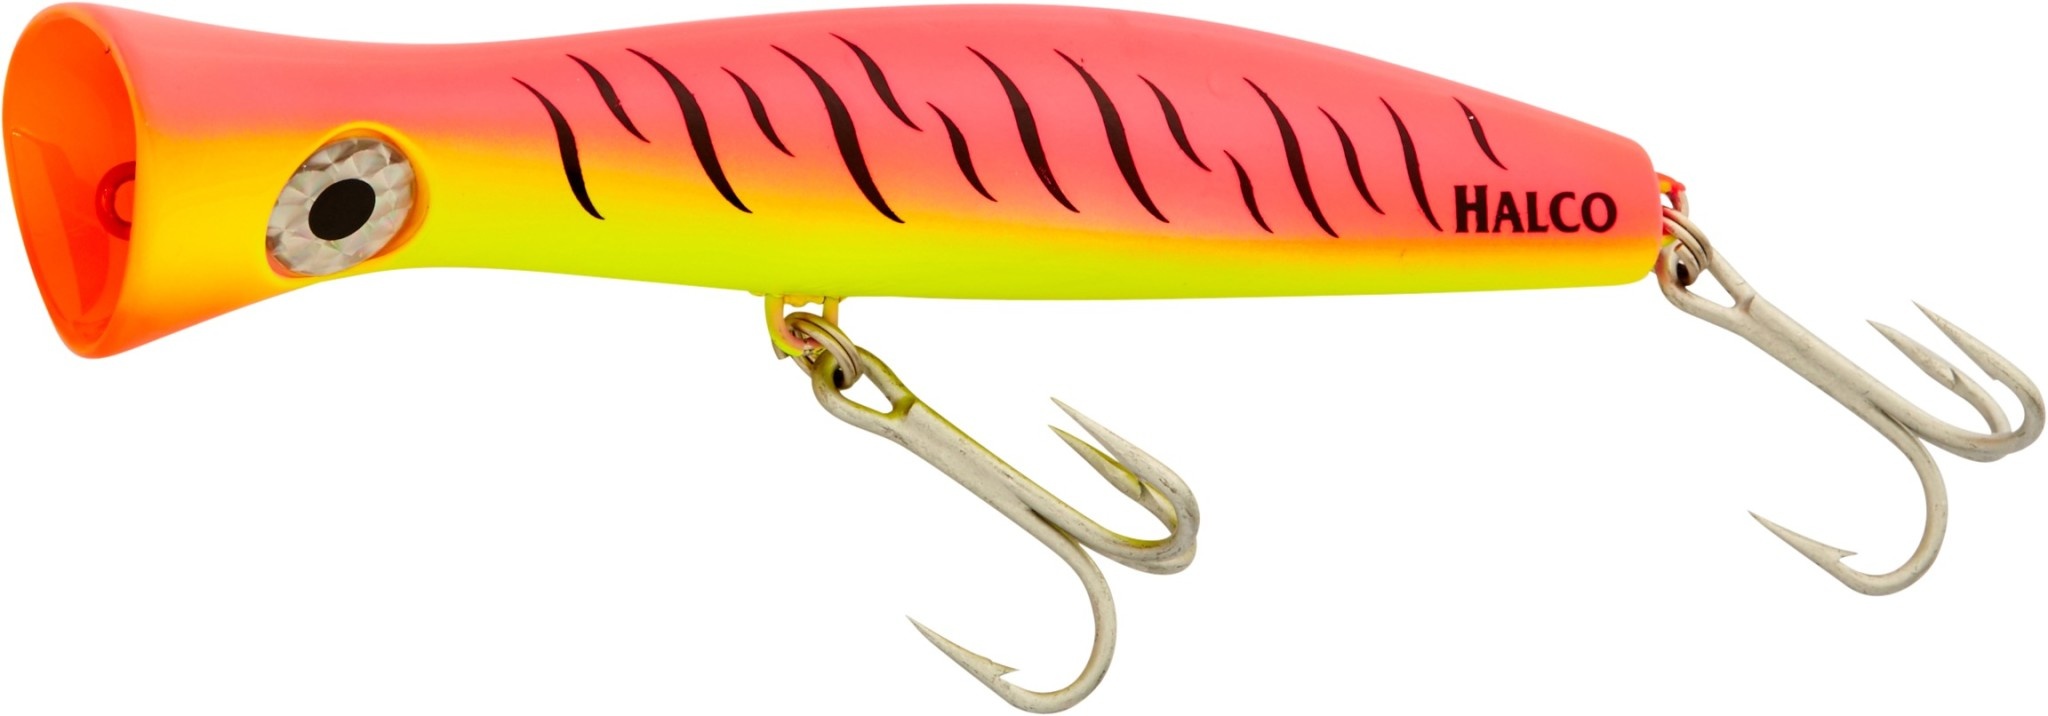 Halco Roosta Popper 195 R1 Pink Fluoro - Angler's Choice Tackle